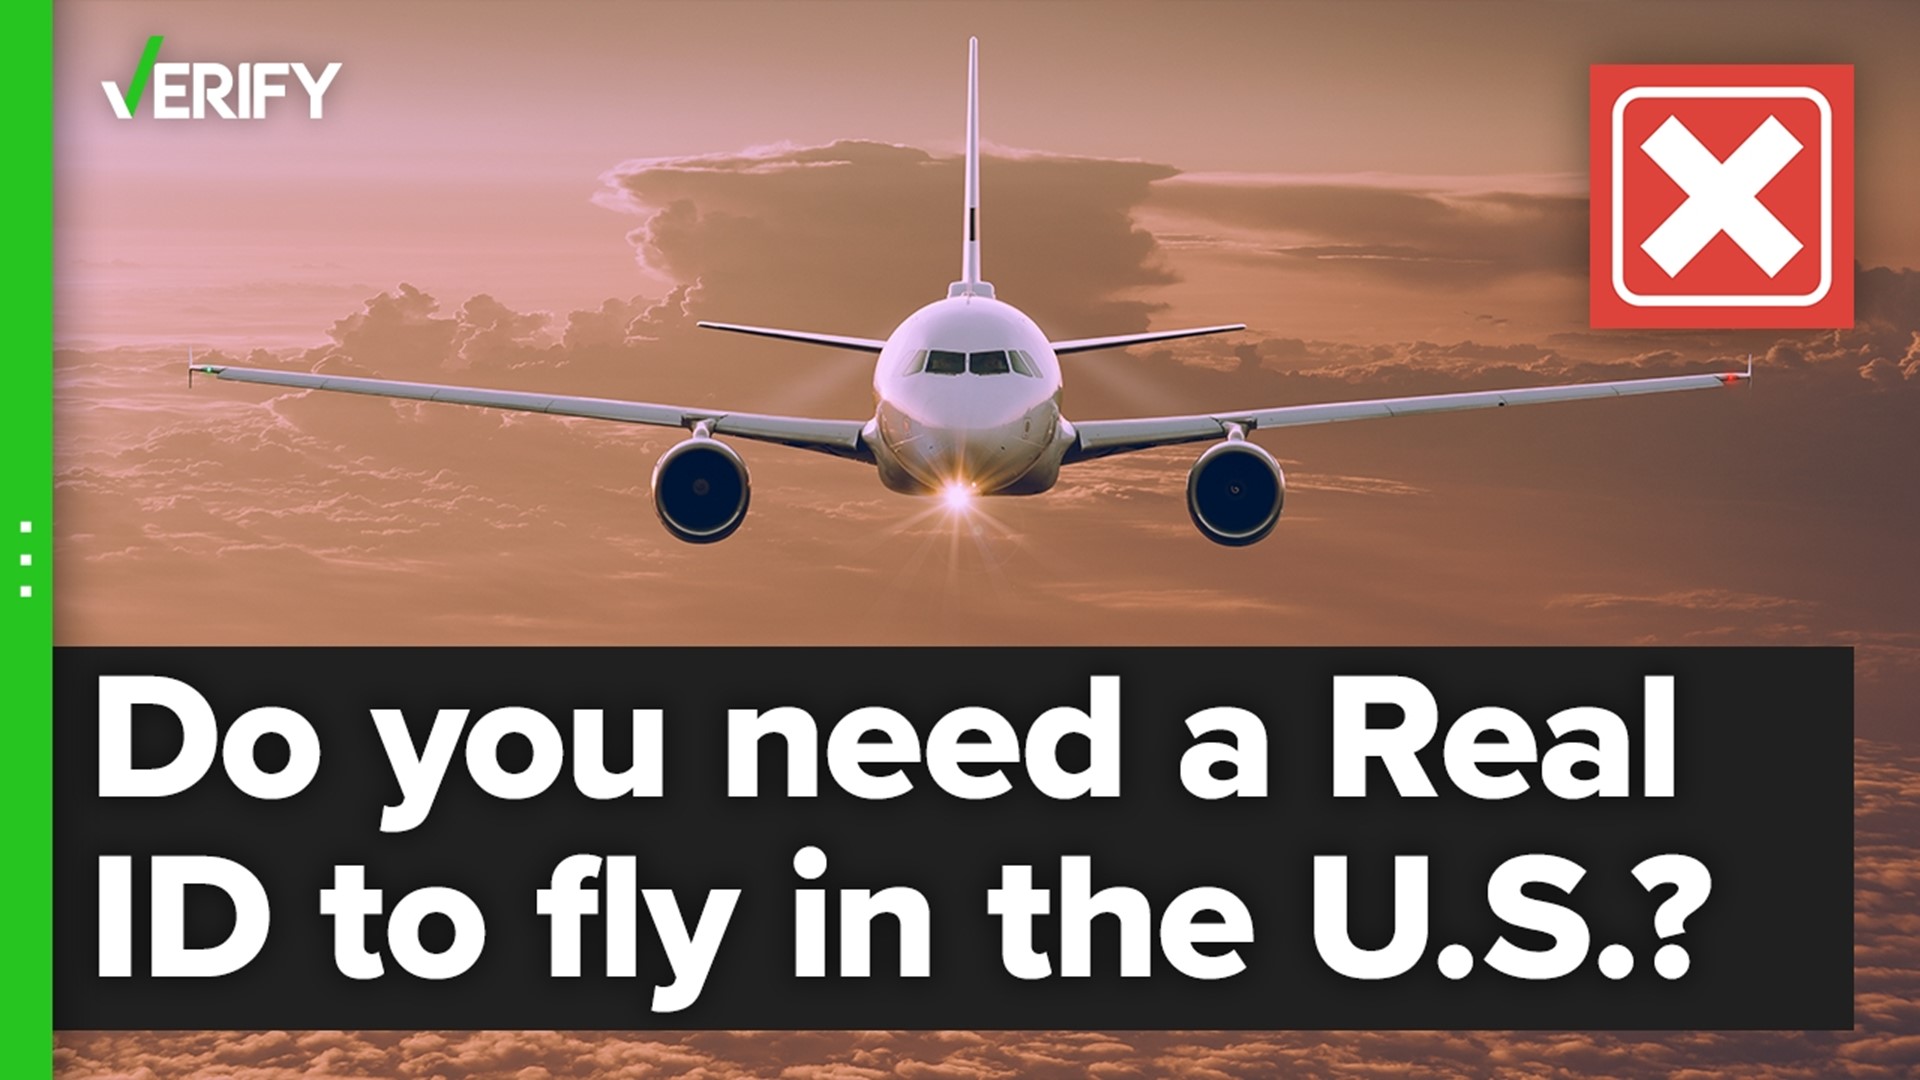 In 2021 DHS said only 43% of driver’s licenses were REAL IDs. If you want to use your license to fly in the U.S. after May 2023, it will need to be a REAL ID.